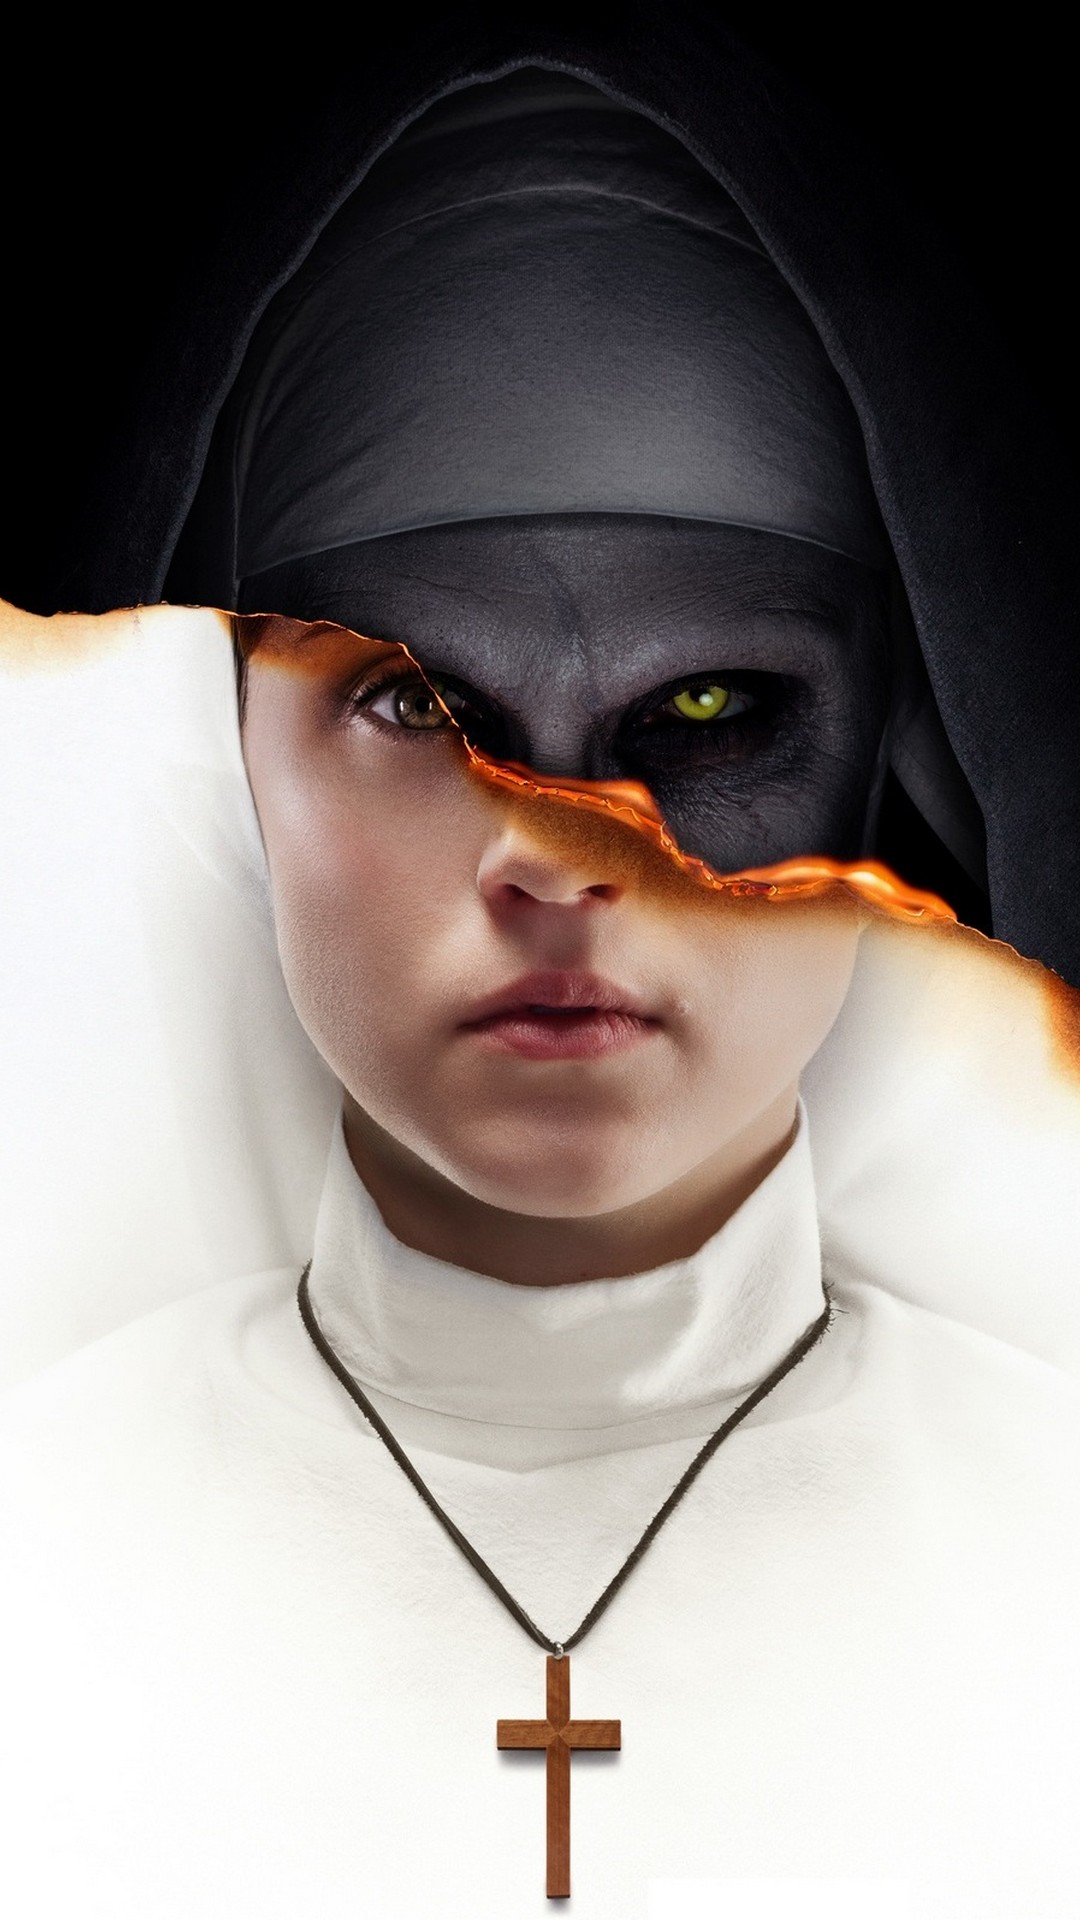 The Nun Wallpaper For Android with resolution 1080X1920 pixel. You can make this wallpaper for your Android backgrounds, Tablet, Smartphones Screensavers and Mobile Phone Lock Screen